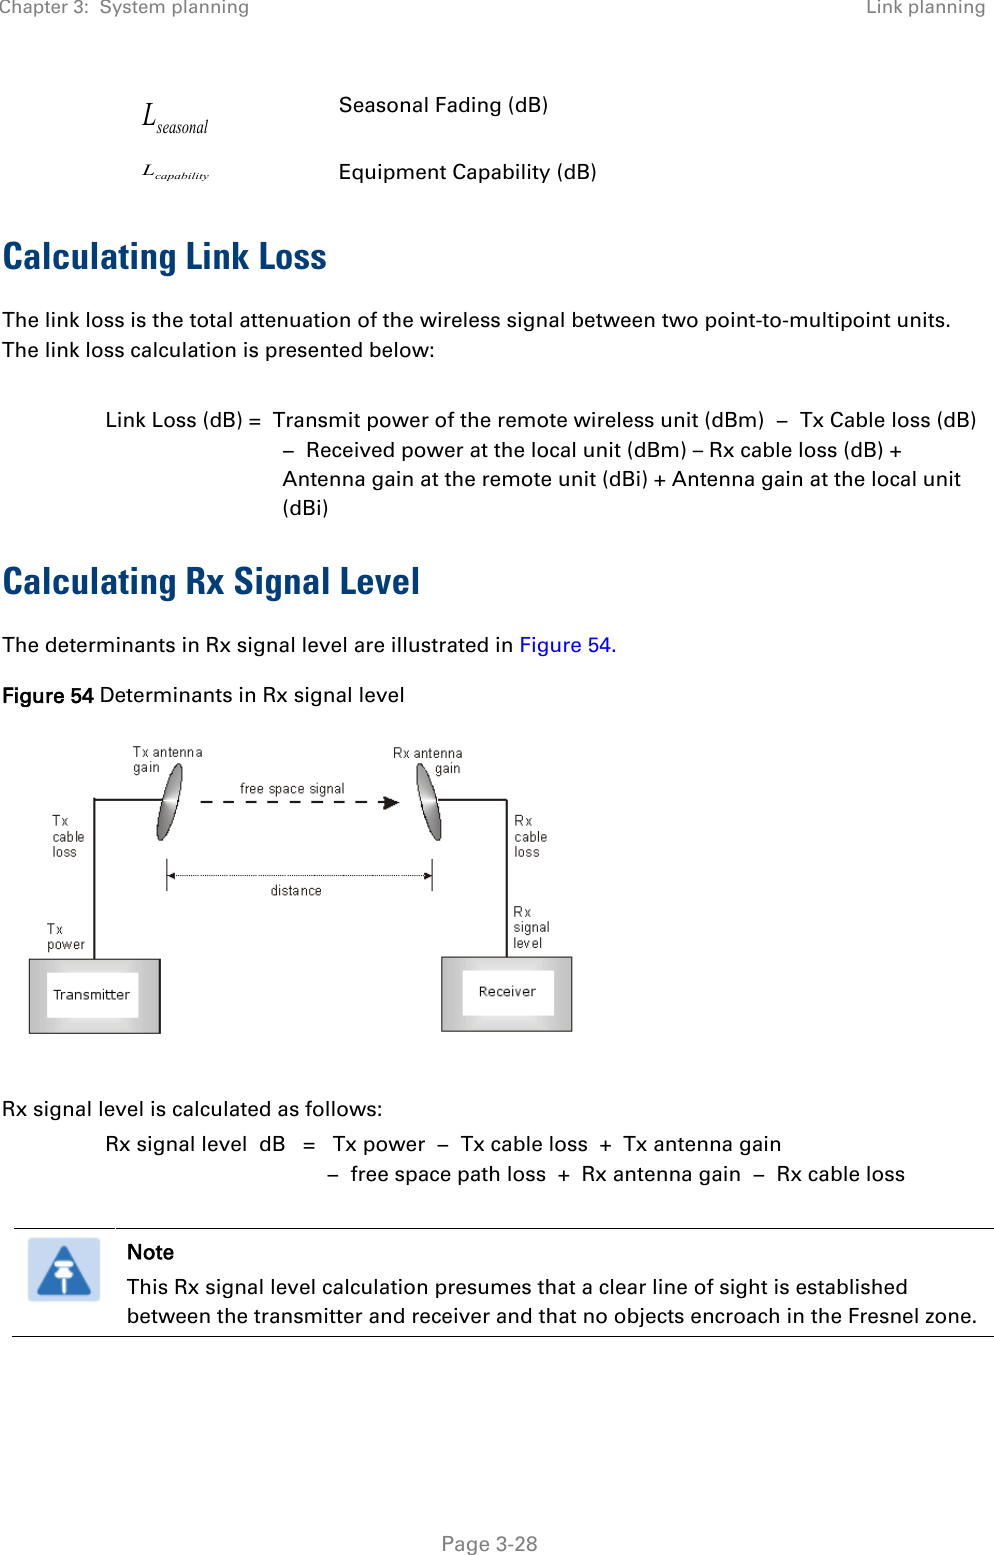 Chapter 3:  System planning Link planning   Page 3-28 seasonalL Seasonal Fading (dB) capabilityL Equipment Capability (dB) Calculating Link Loss The link loss is the total attenuation of the wireless signal between two point-to-multipoint units. The link loss calculation is presented below:  Link Loss (dB) =  Transmit power of the remote wireless unit (dBm)  −  Tx Cable loss (dB) −  Received power at the local unit (dBm) – Rx cable loss (dB) + Antenna gain at the remote unit (dBi) + Antenna gain at the local unit (dBi) Calculating Rx Signal Level The determinants in Rx signal level are illustrated in Figure 54. Figure 54 Determinants in Rx signal level   Rx signal level is calculated as follows: Rx signal level  dB   =   Tx power  −  Tx cable loss  +  Tx antenna gain   −  free space path loss  +  Rx antenna gain  −  Rx cable loss   Note This Rx signal level calculation presumes that a clear line of sight is established between the transmitter and receiver and that no objects encroach in the Fresnel zone.  